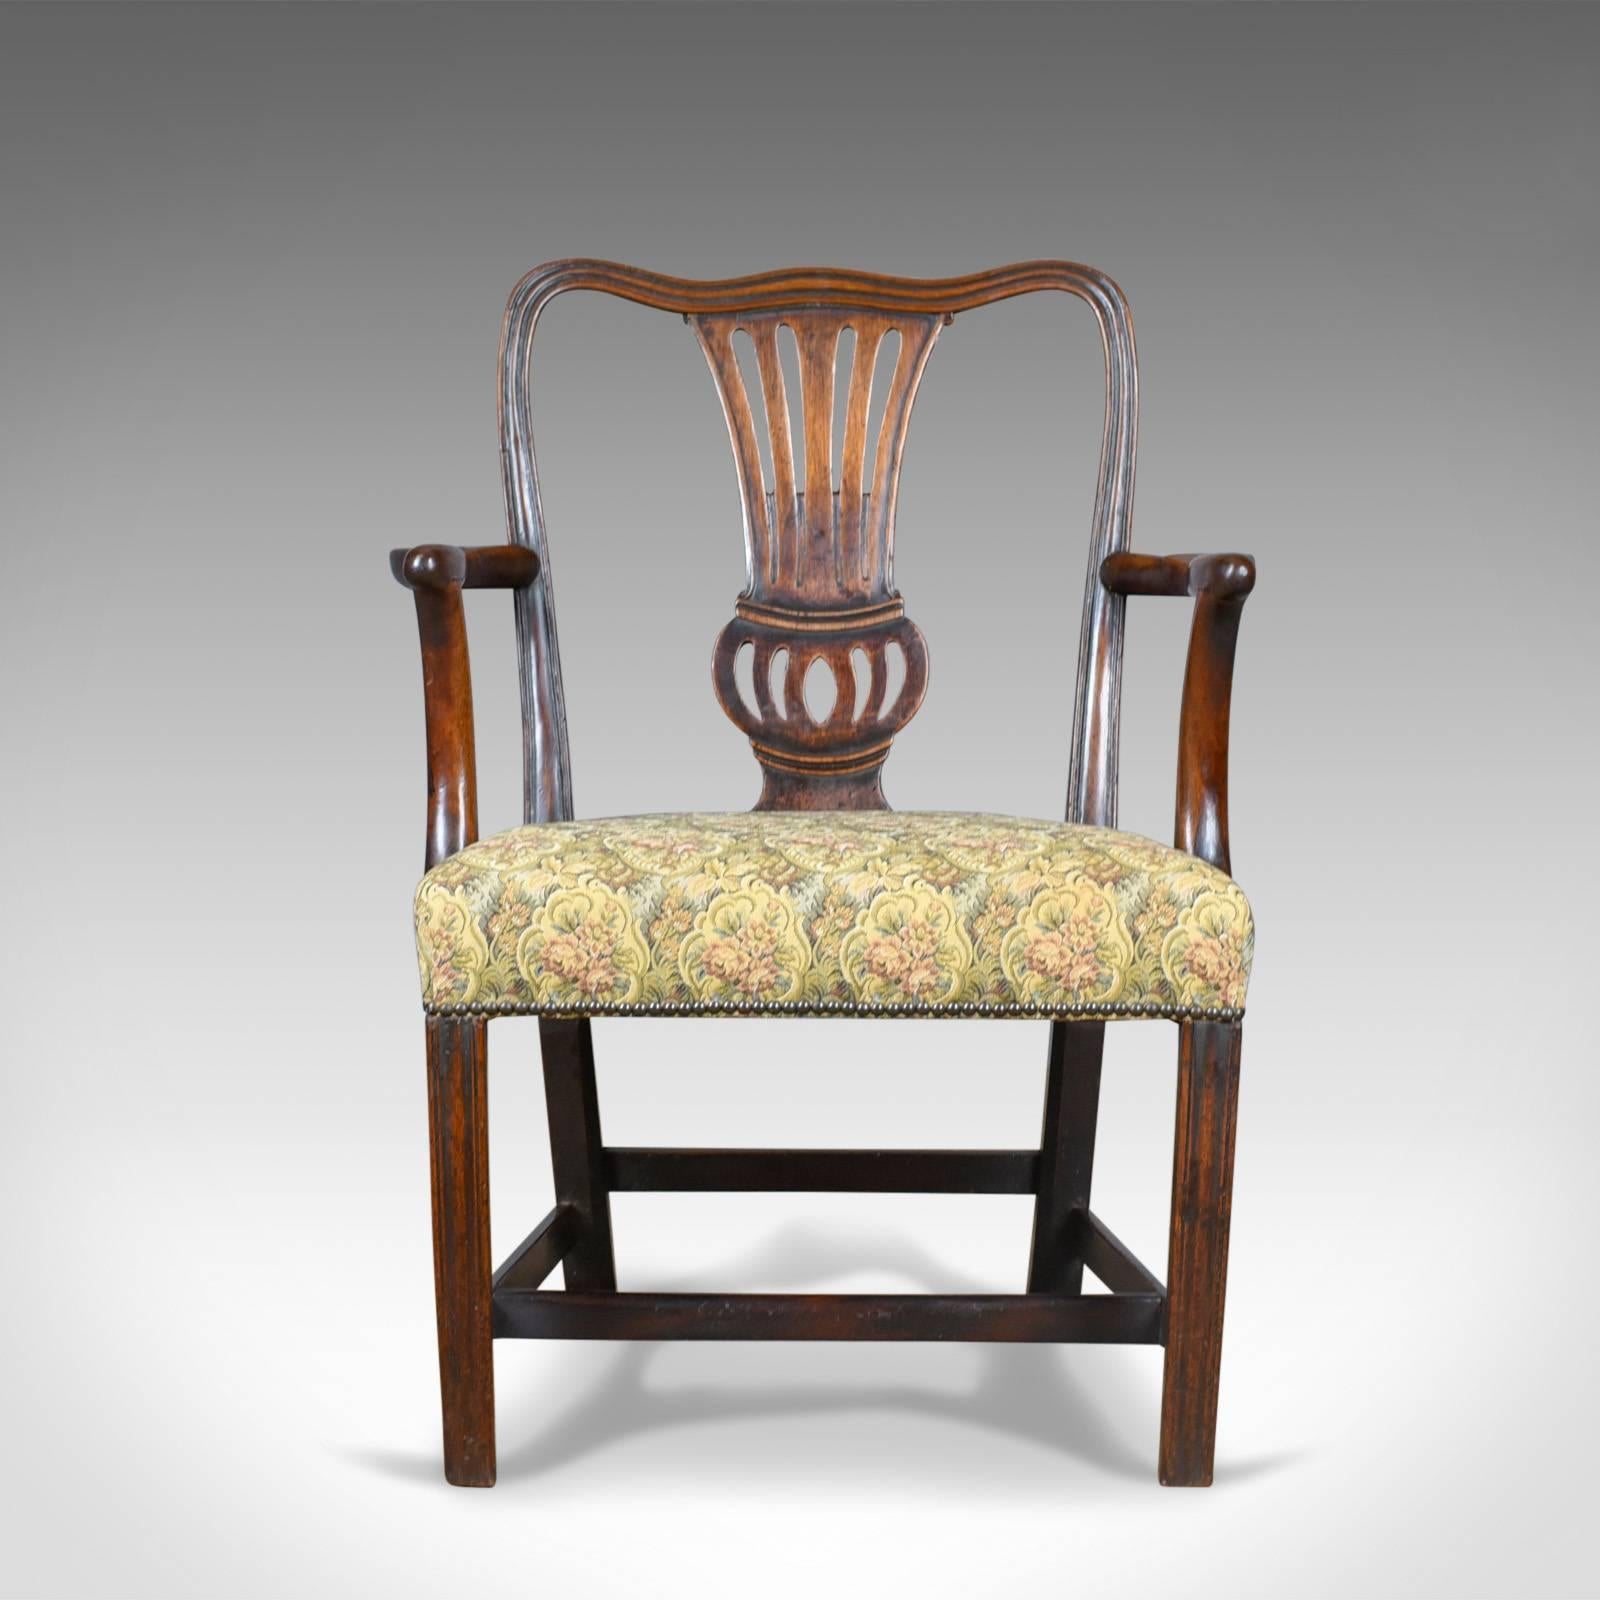 This is an antique elbow chair, an English, Georgian, mahogany open armchair dating to the late 18th century, circa 1780.

Of quality craftsmanship in select mahogany
Displaying good color and a desirable aged patina
Mellow tones with a lustrous